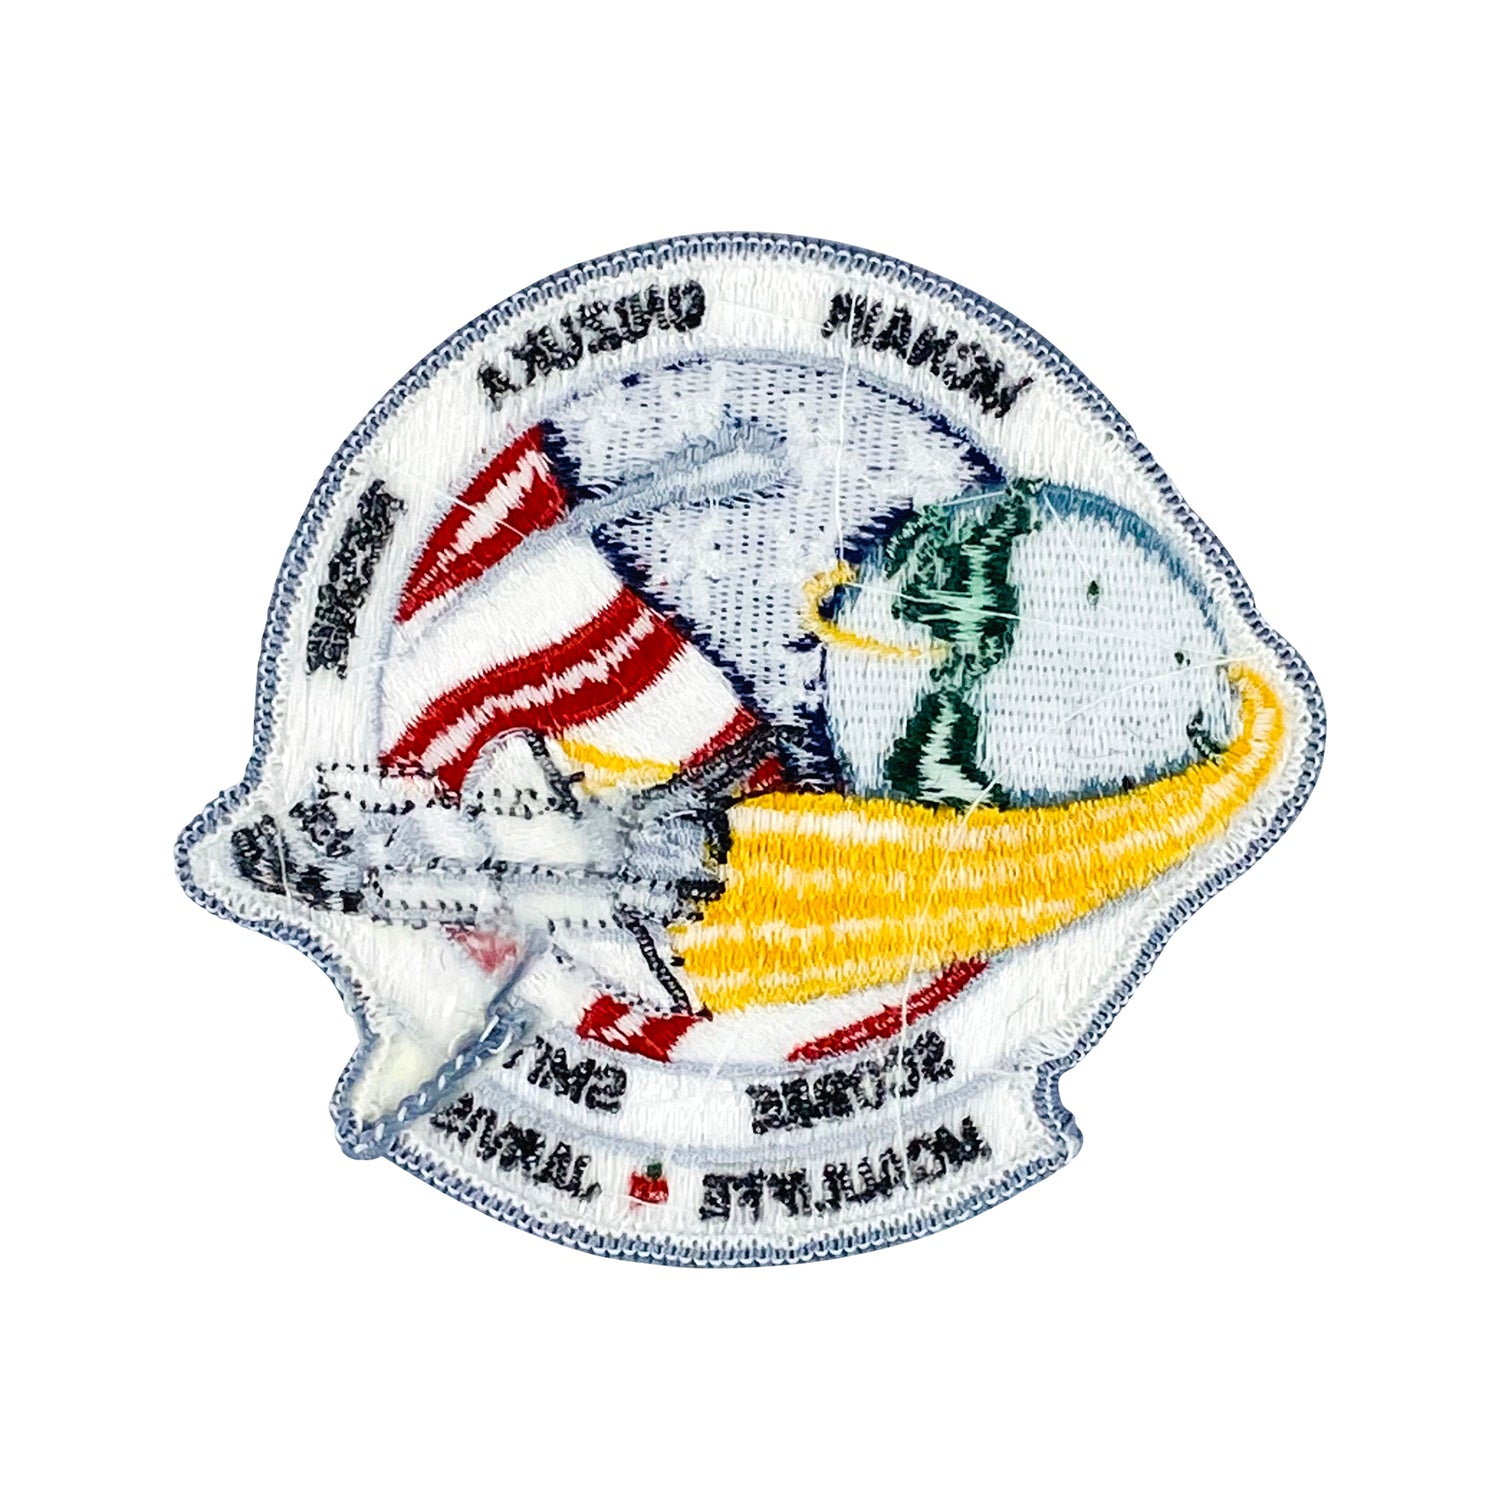 SPACE SHUTTLE CHALLENGER PATCH